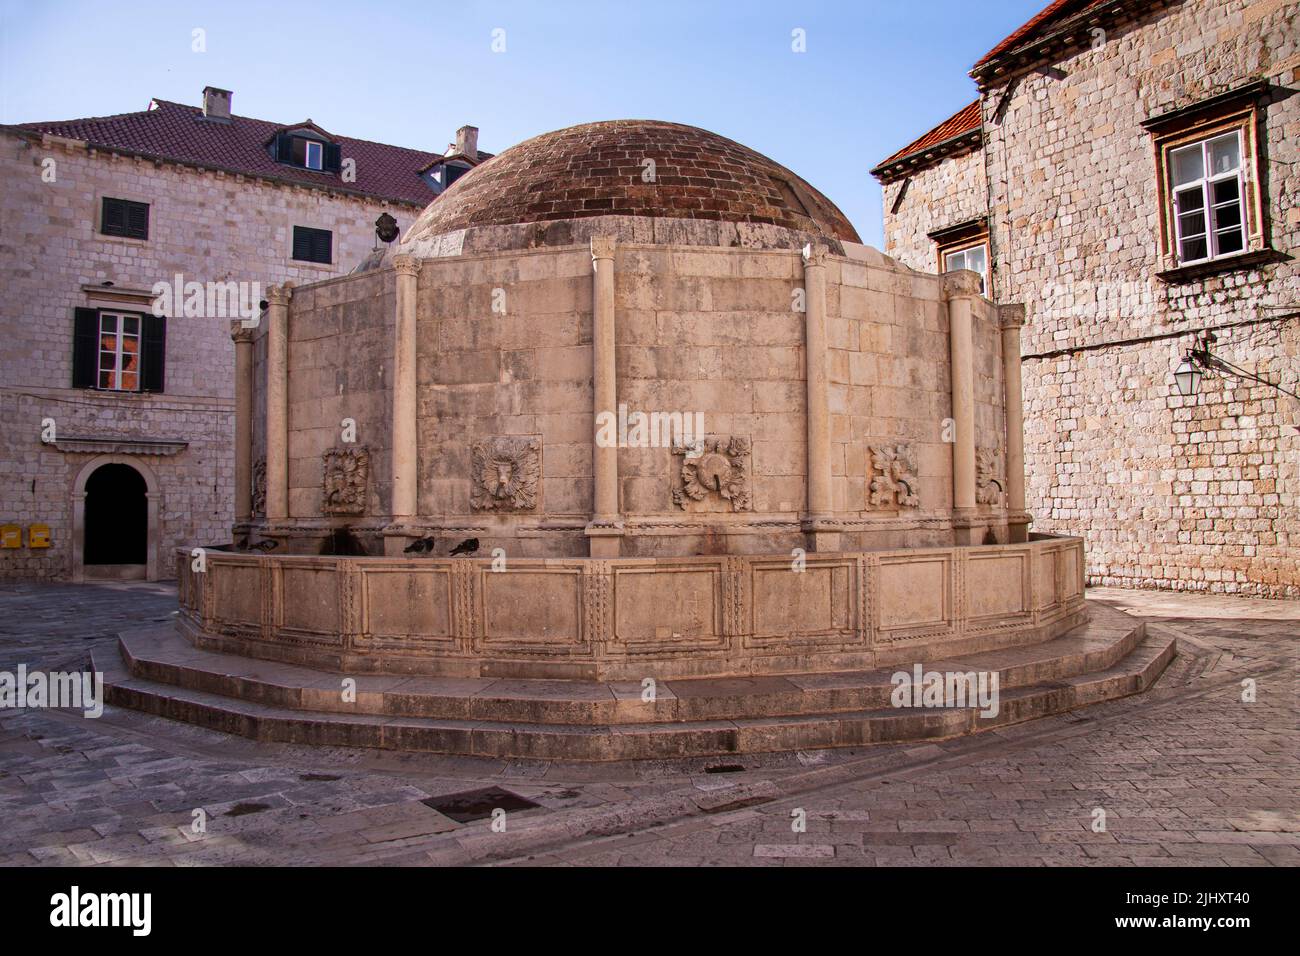 Onofrio Fountain is one of the ancient fountains of Dubrovnik, Croatia, providing freash water. Stock Photo